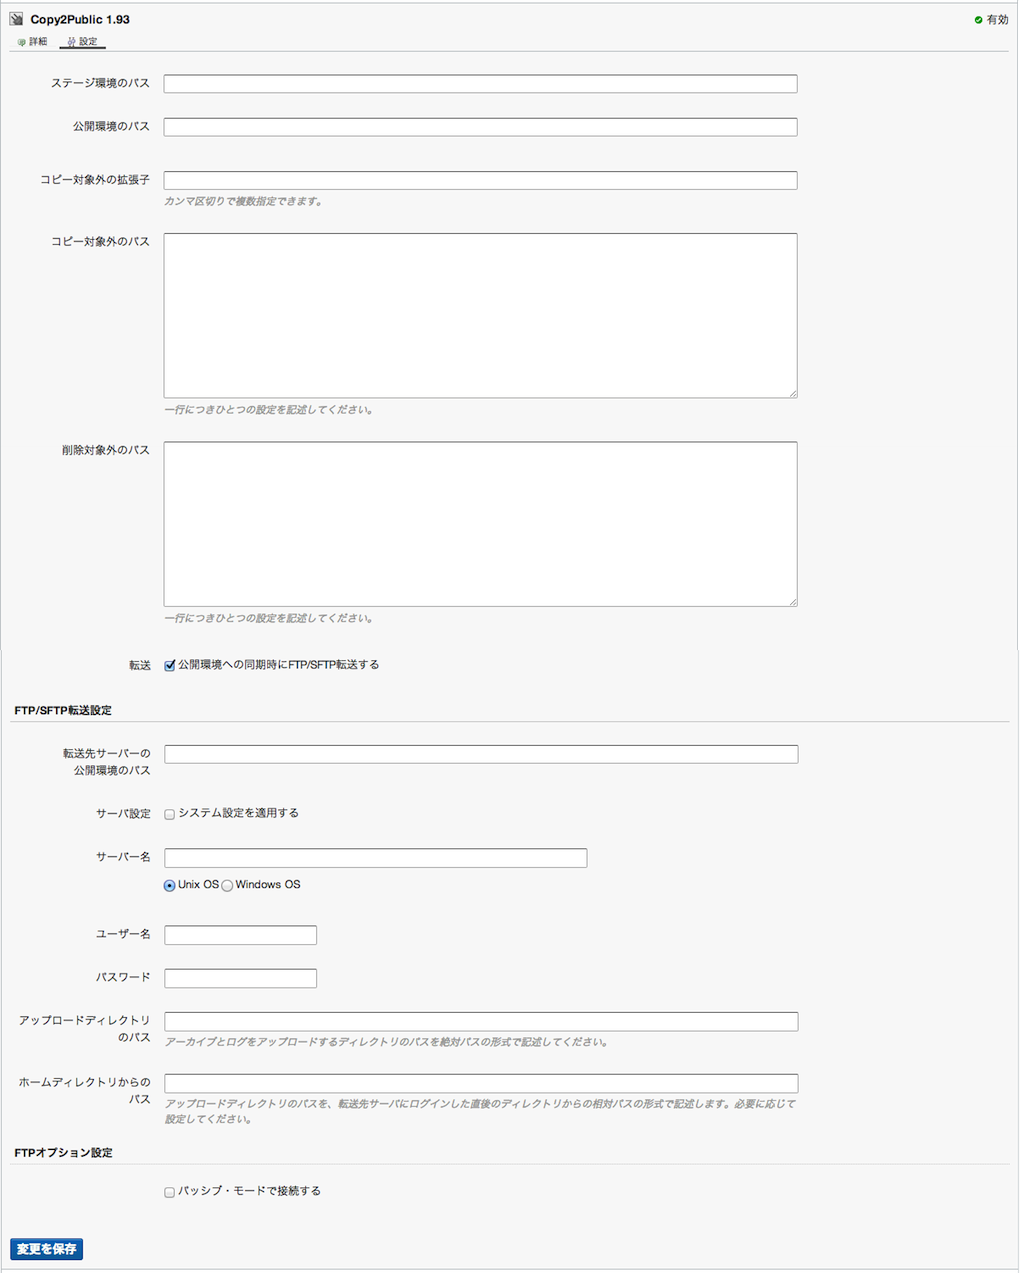 http://www.powercms.jp/blog/2013/12/13/c2p-settings-after.png